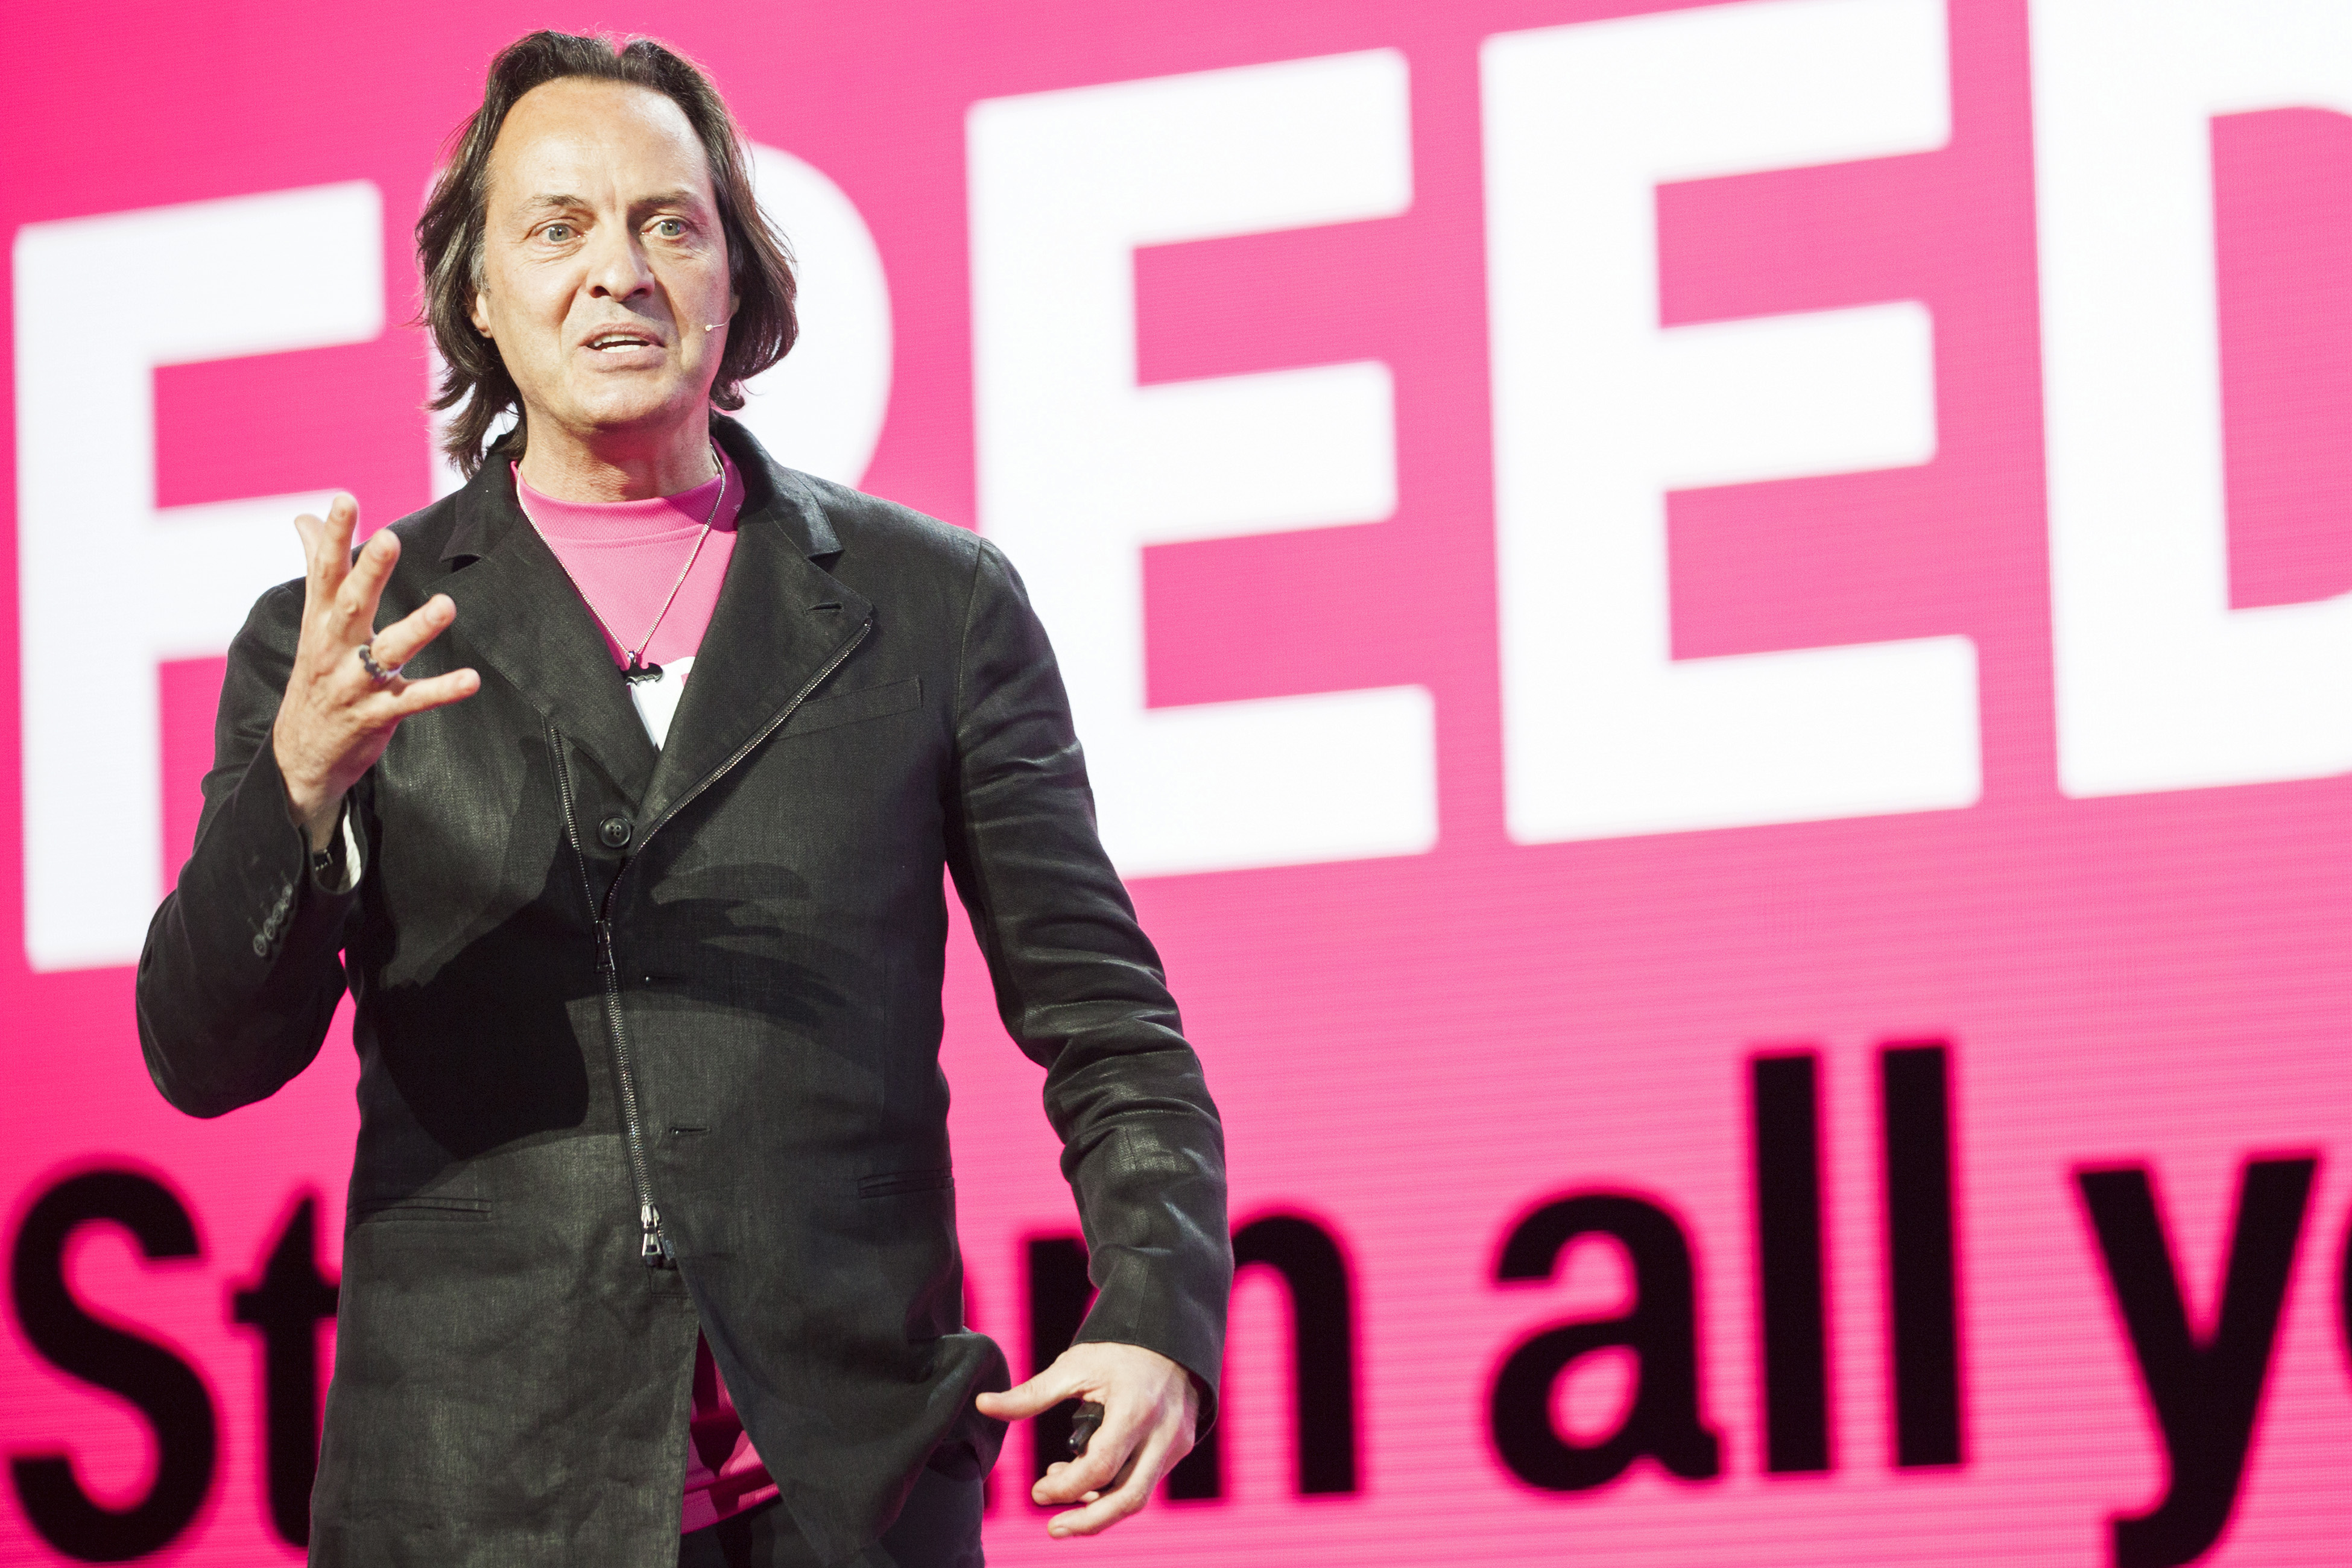 John Legere, chief executive officer of T-Mobile US Inc., speaks during an event in Seattle, Washington, U.S., on Wednesday, June 18, 2014. (Bloomberg/ Getty Images)